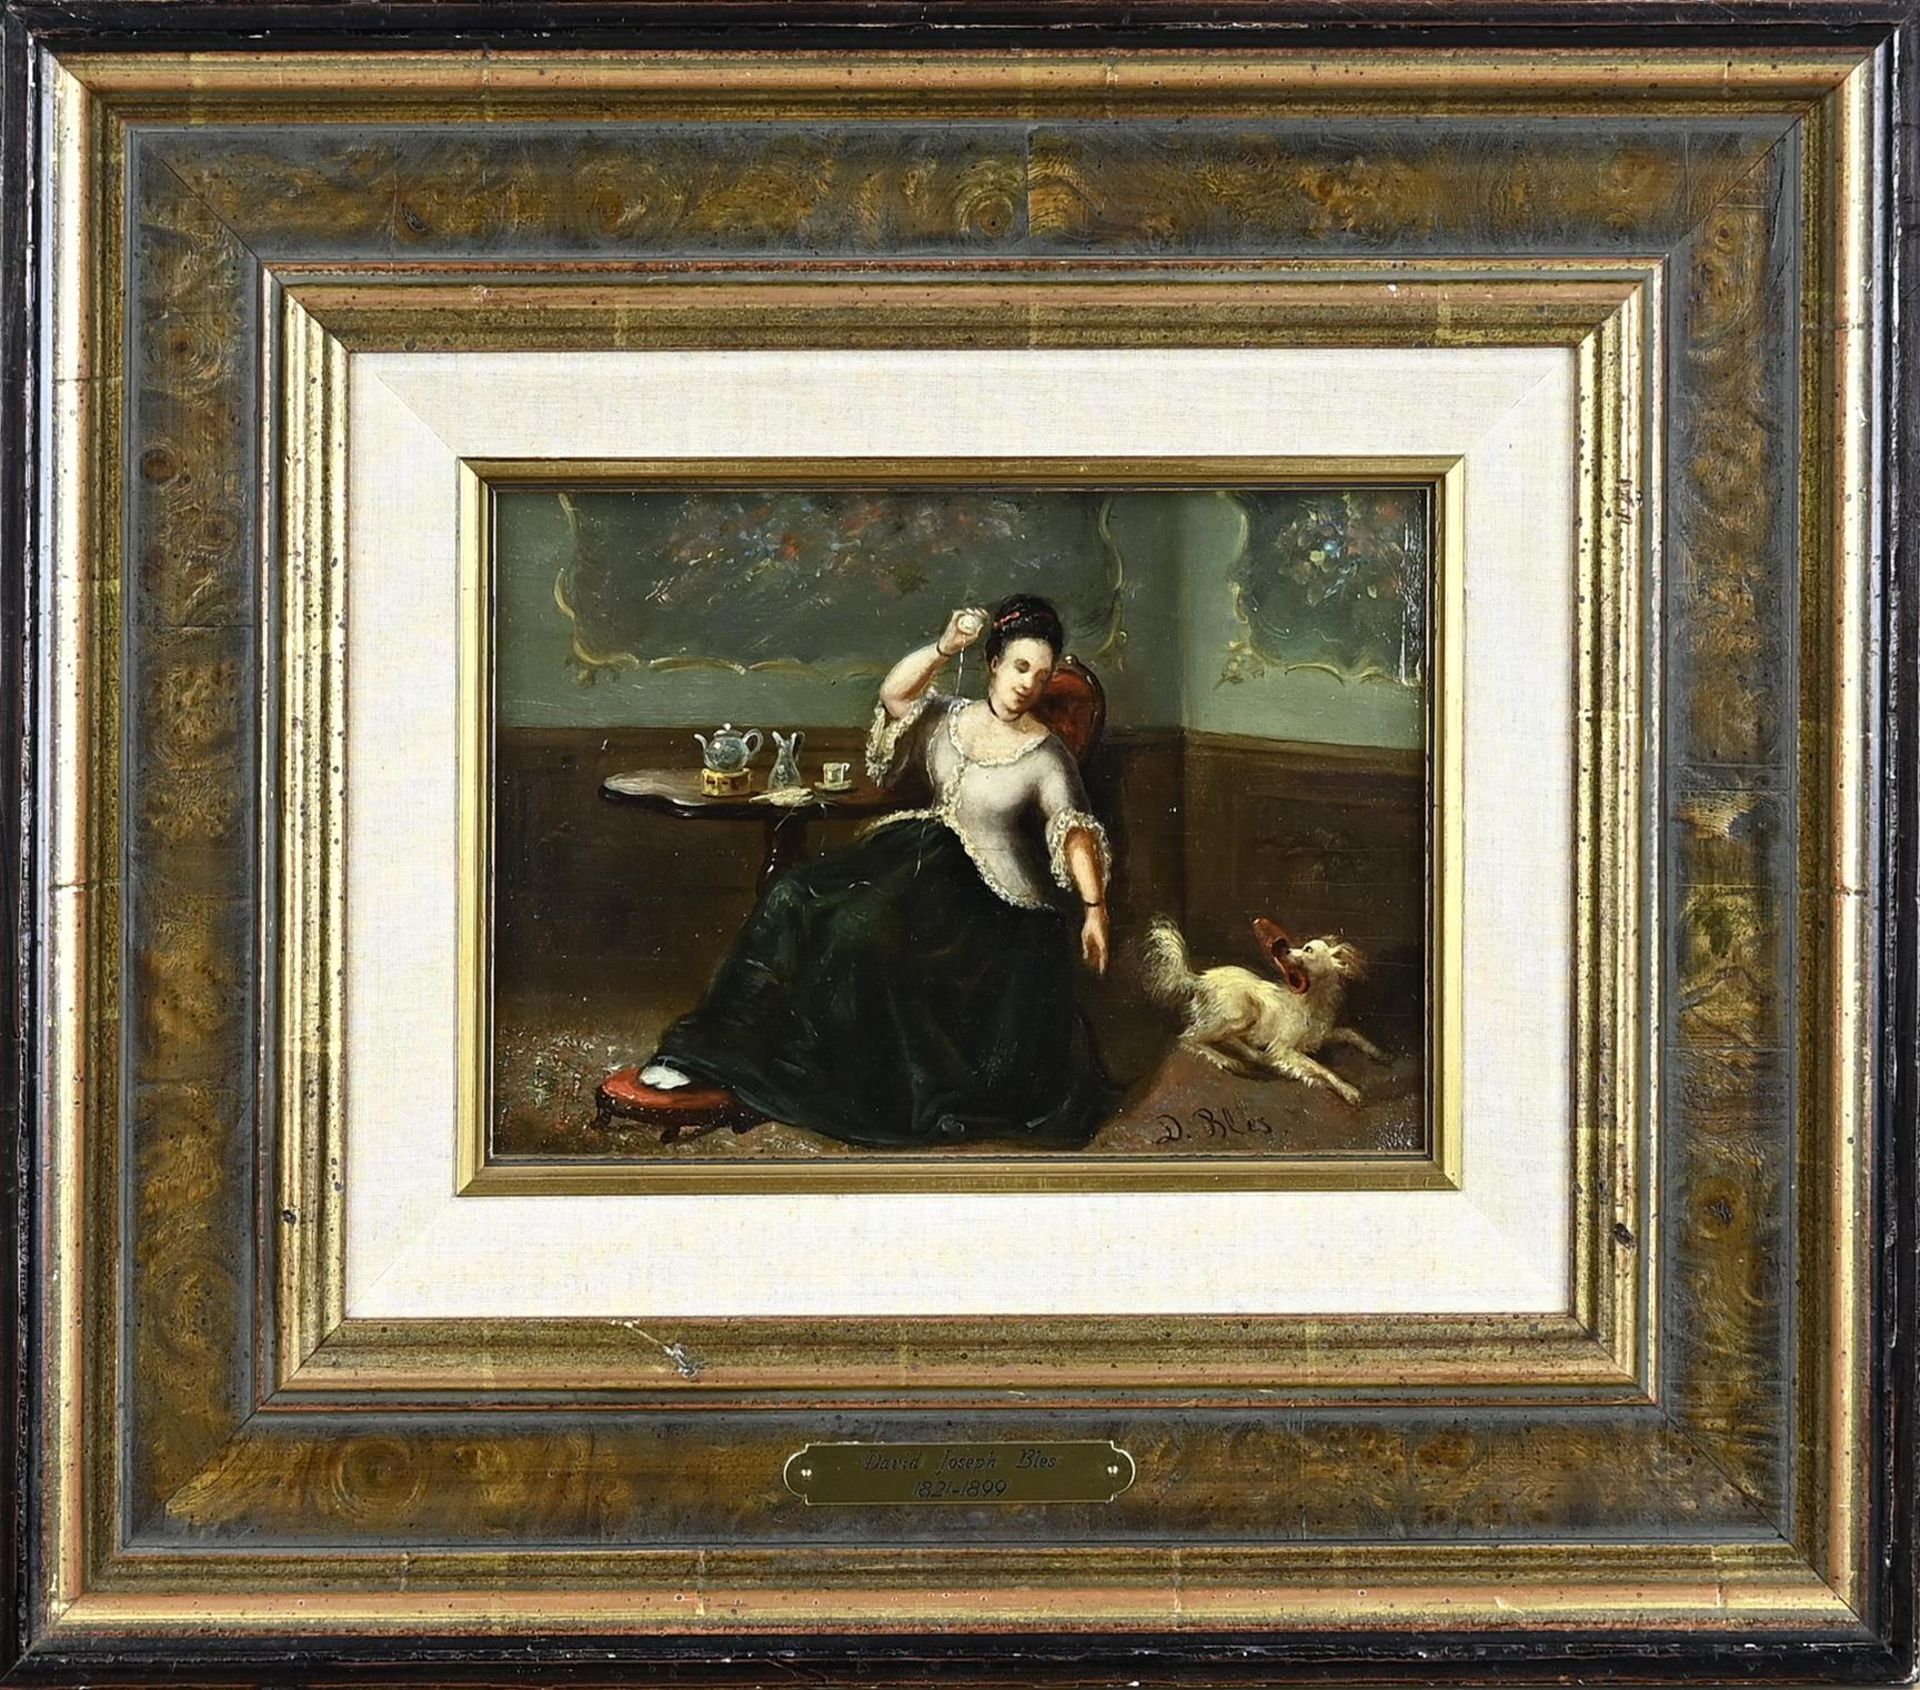 David Bles, Lady with Ball of Wool and Dog Stealing a Slipper